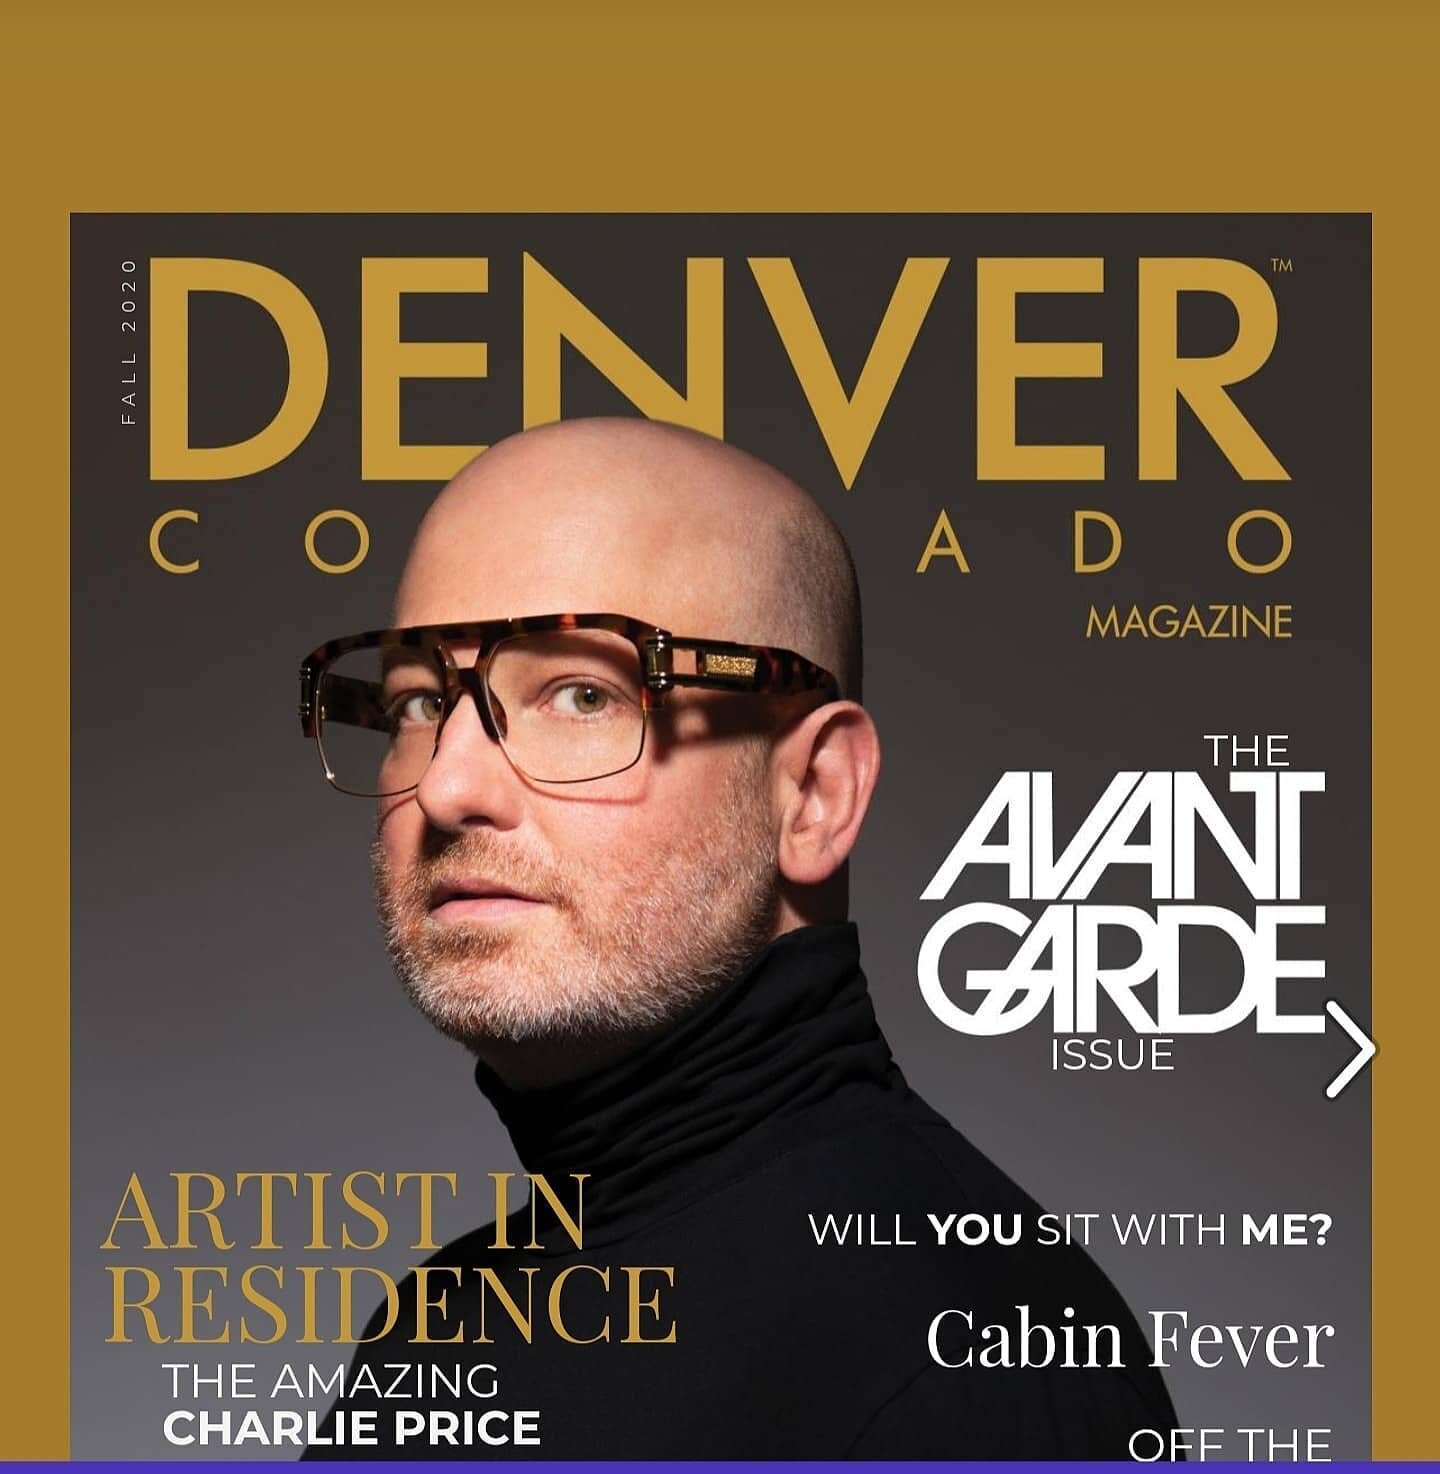 Thrilled to be featured in this Publication with Model Stephanie Maner &amp; Designer Steve Sells alongside many amazing Denver based Talents in Denver Colorado Luxury Magazine! 
.
Special thanks to Trisha Ventker @denvercoloradoluxurymagazine
.
@pos